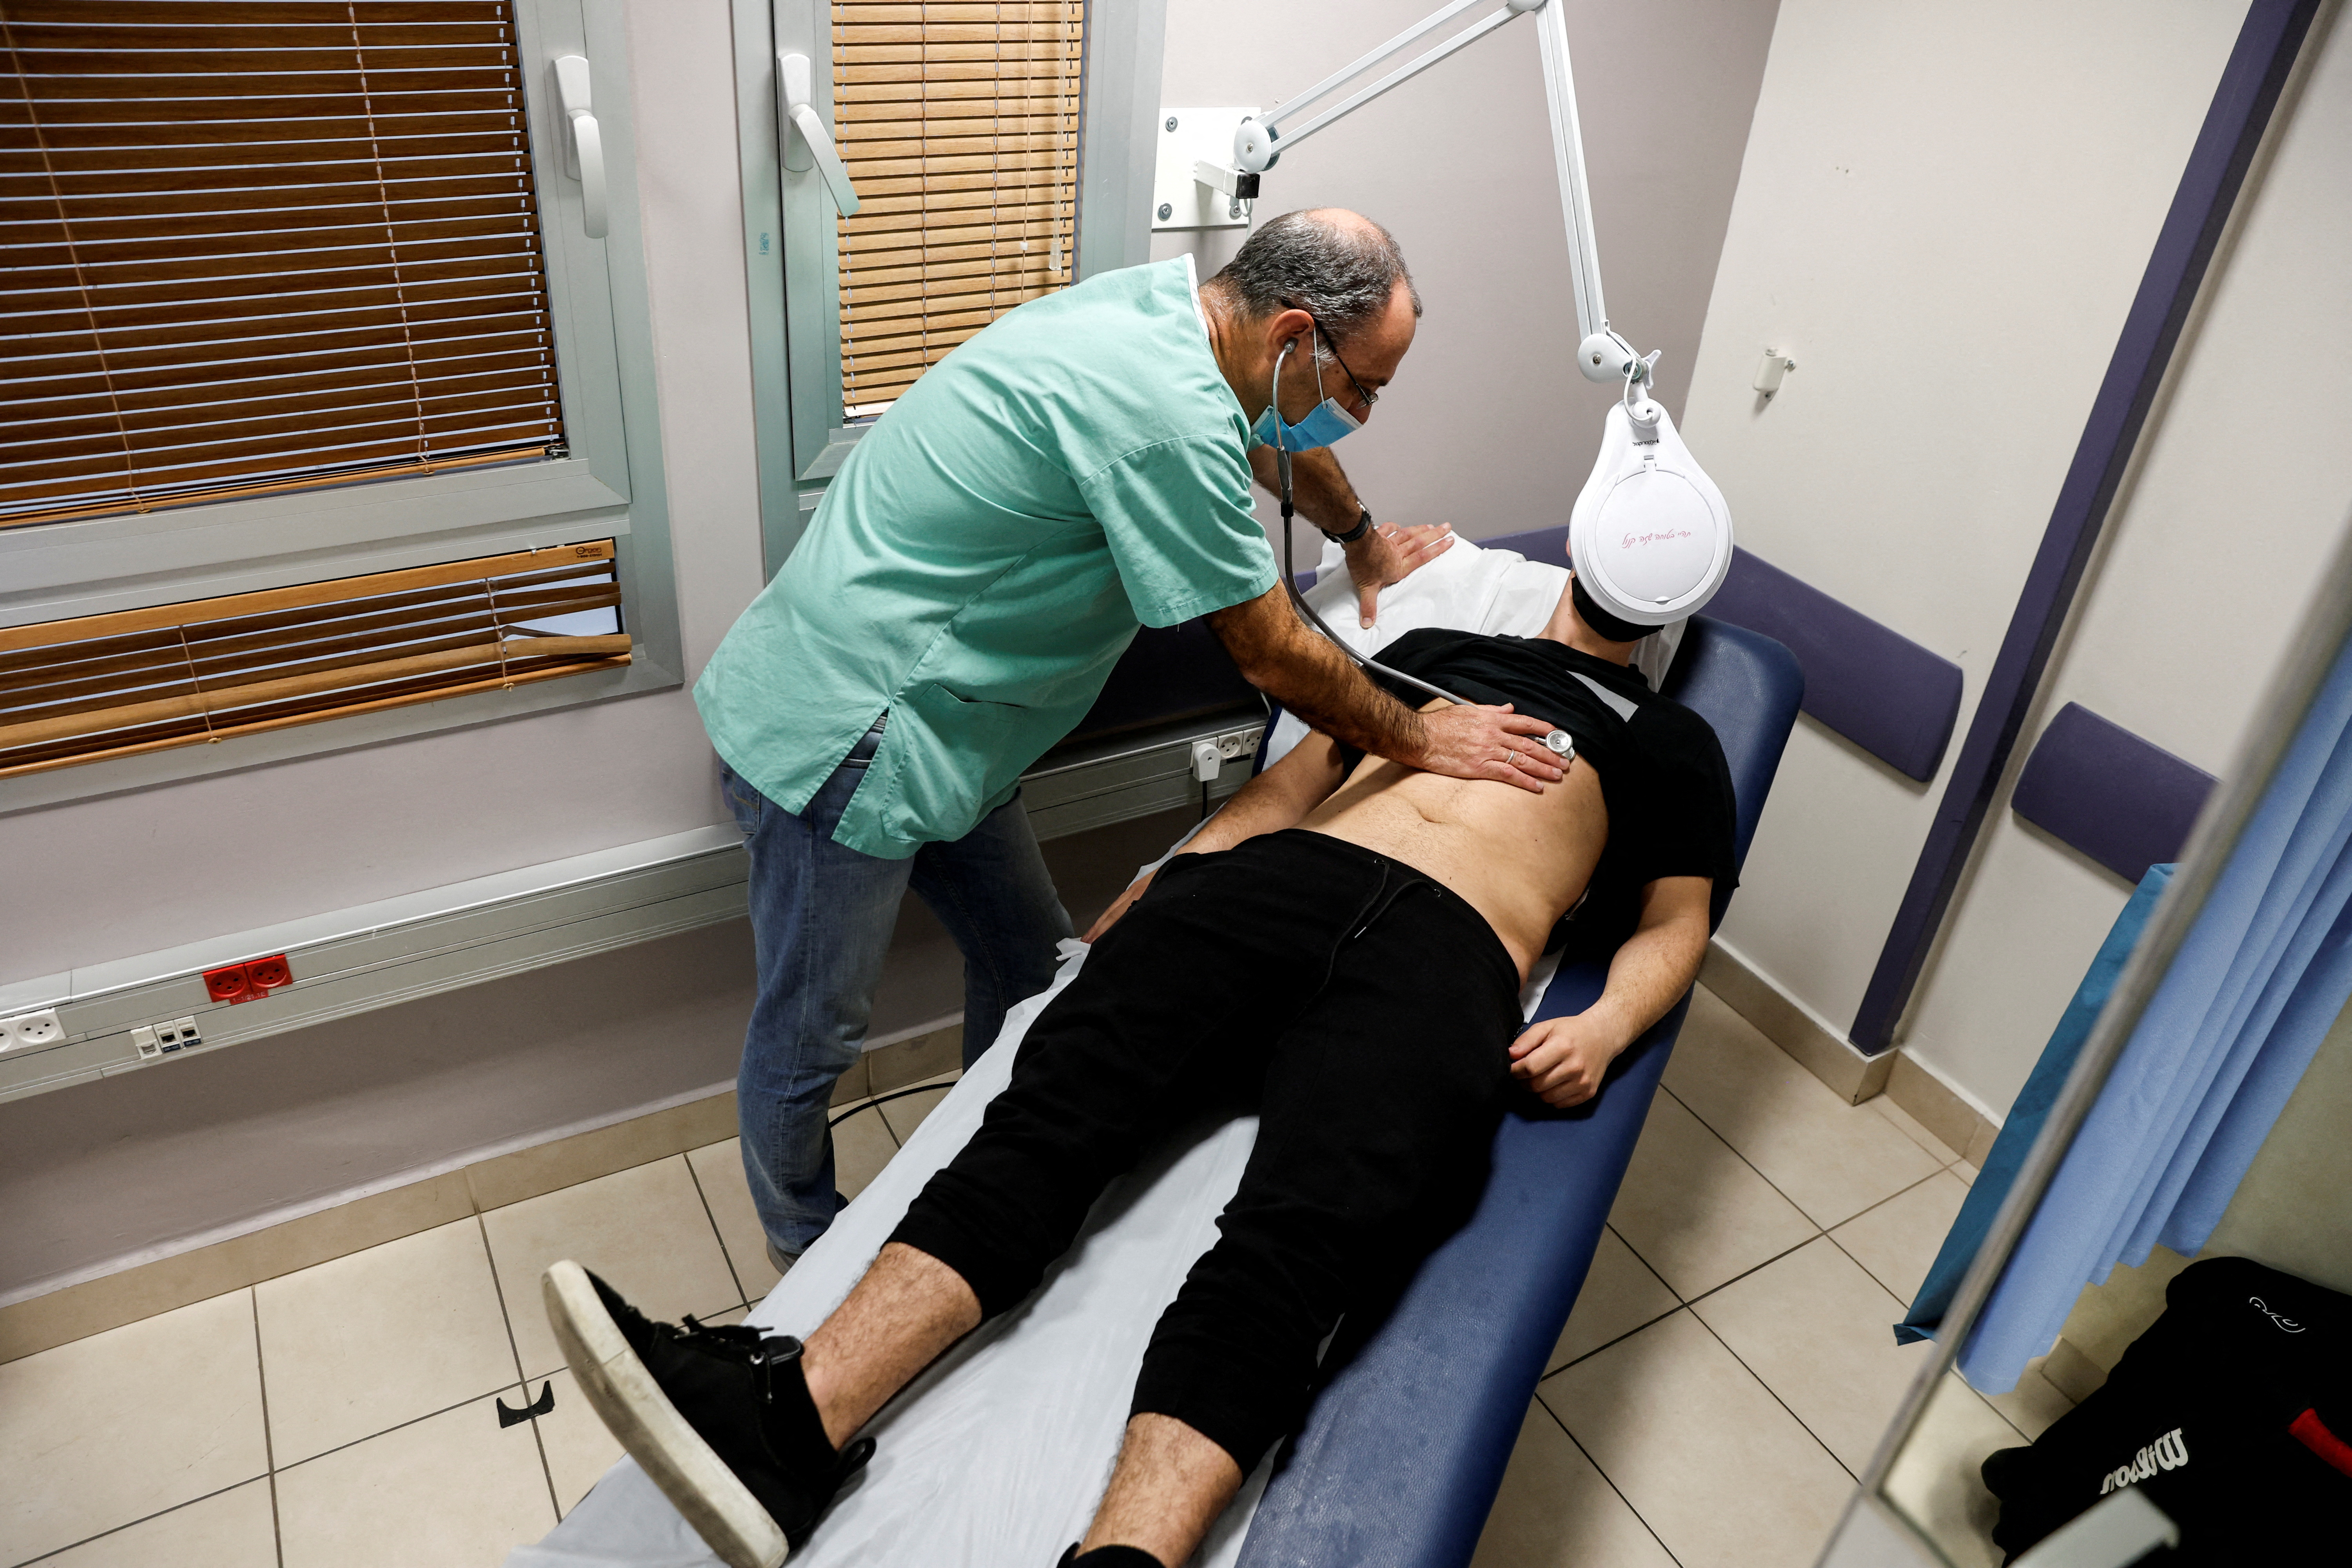 A patient suffering from Long COVID is examined in the post-coronavirus disease (COVID-19) clinic of Ichilov Hospital in Tel Aviv